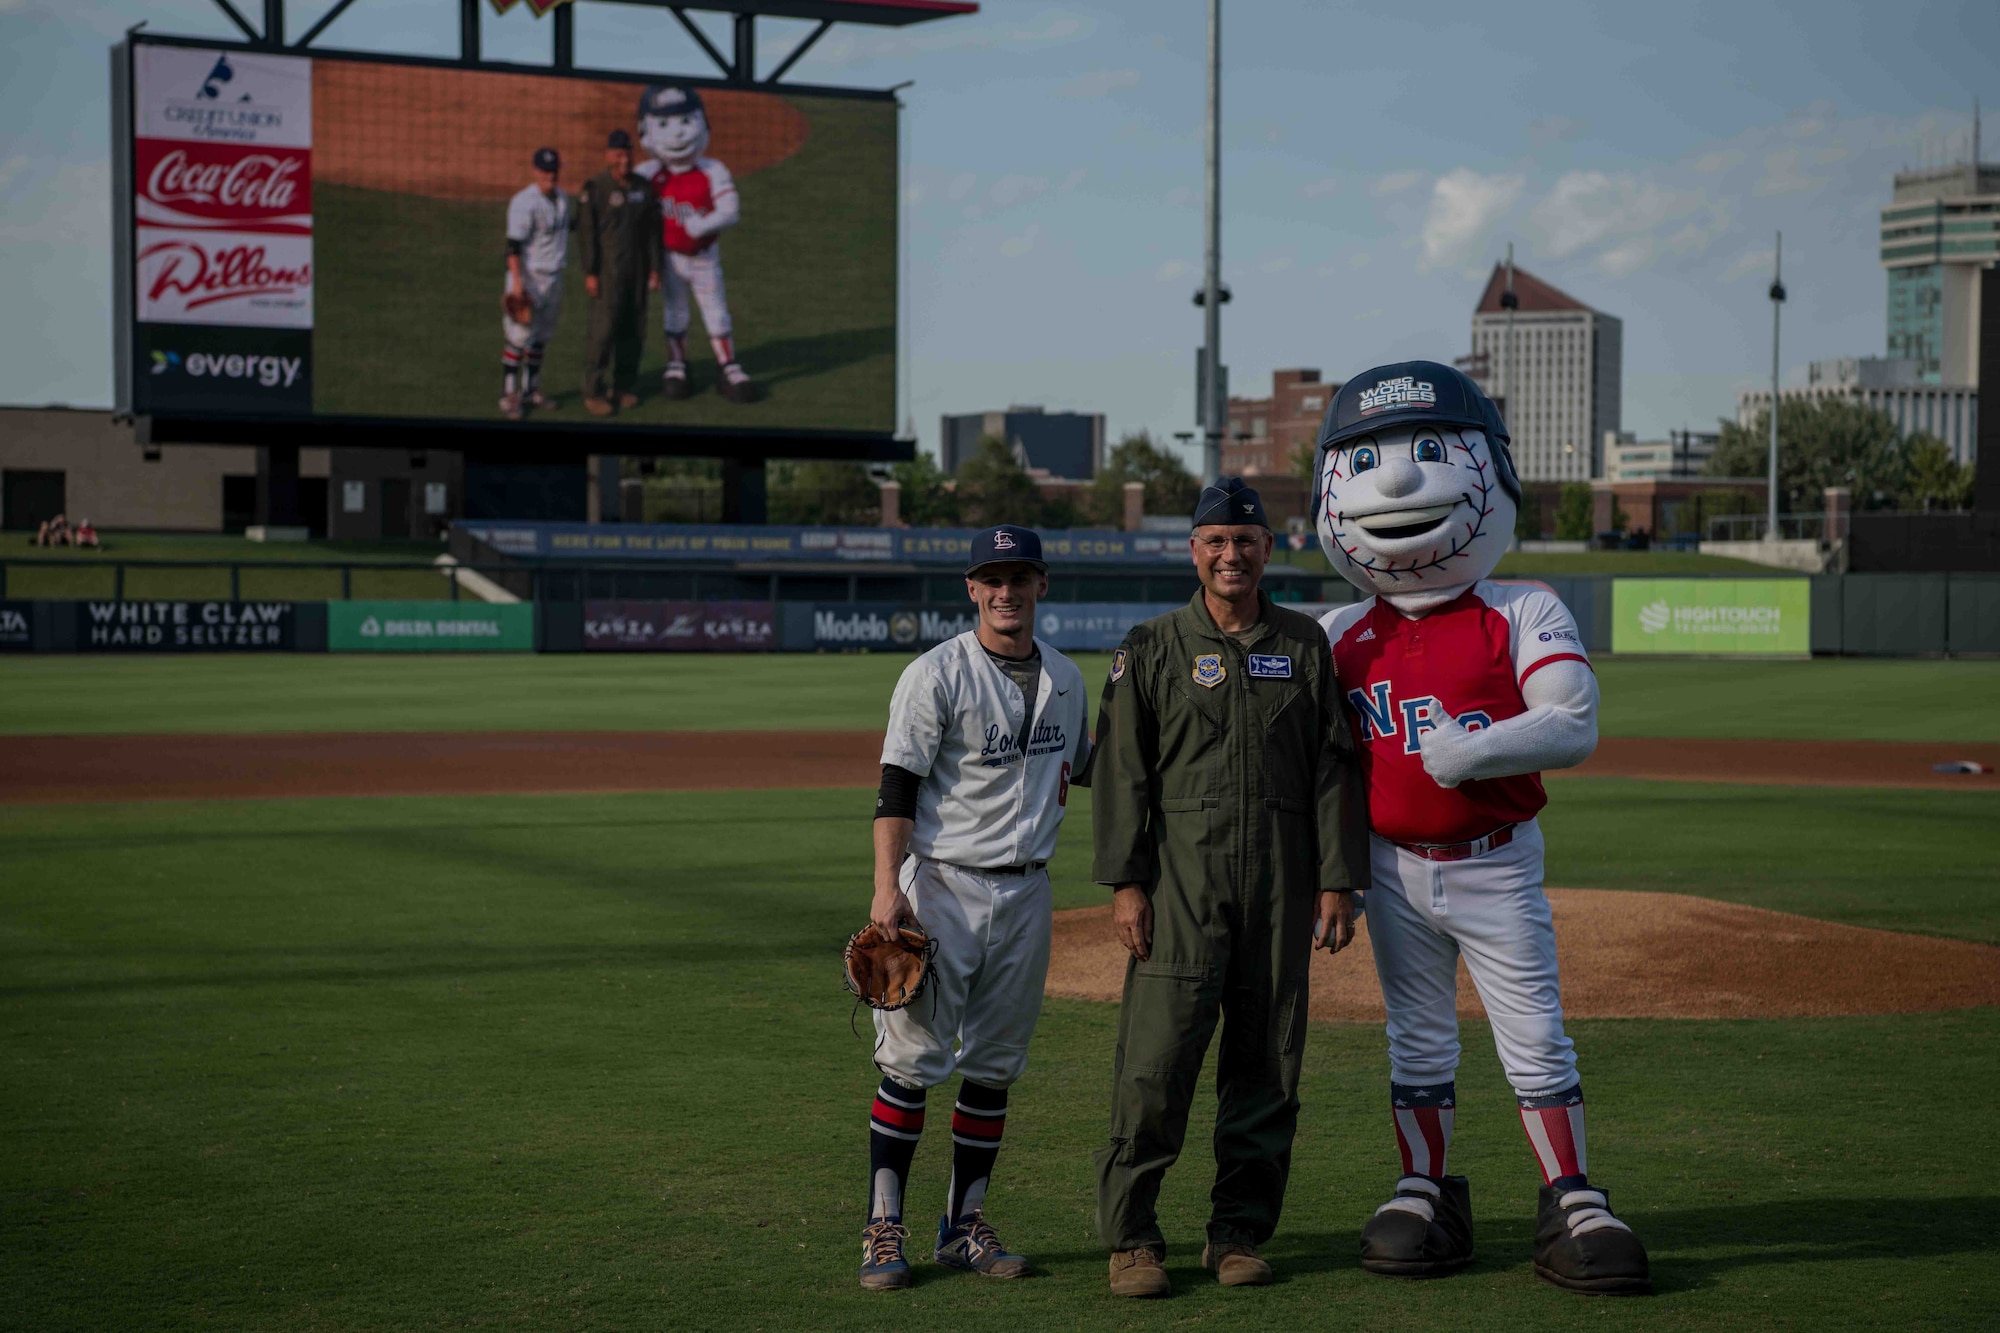 Col. Nate Vogel, 22nd Air Refueling Wing commander (center), poses for a photo with Max Puls, Lonestar Baseball Club first baseman (left), and the National Baseball Congress World Series mascot before the ball game, Aug. 19, 2021, in Wichita, Kansas. The NBC World Series held their annual tournament in Kansas, and finished with championship week at Riverfront Stadium in Wichita, Kansas. (U.S. Air Force photo by Senior Airman Marc A. Garcia)